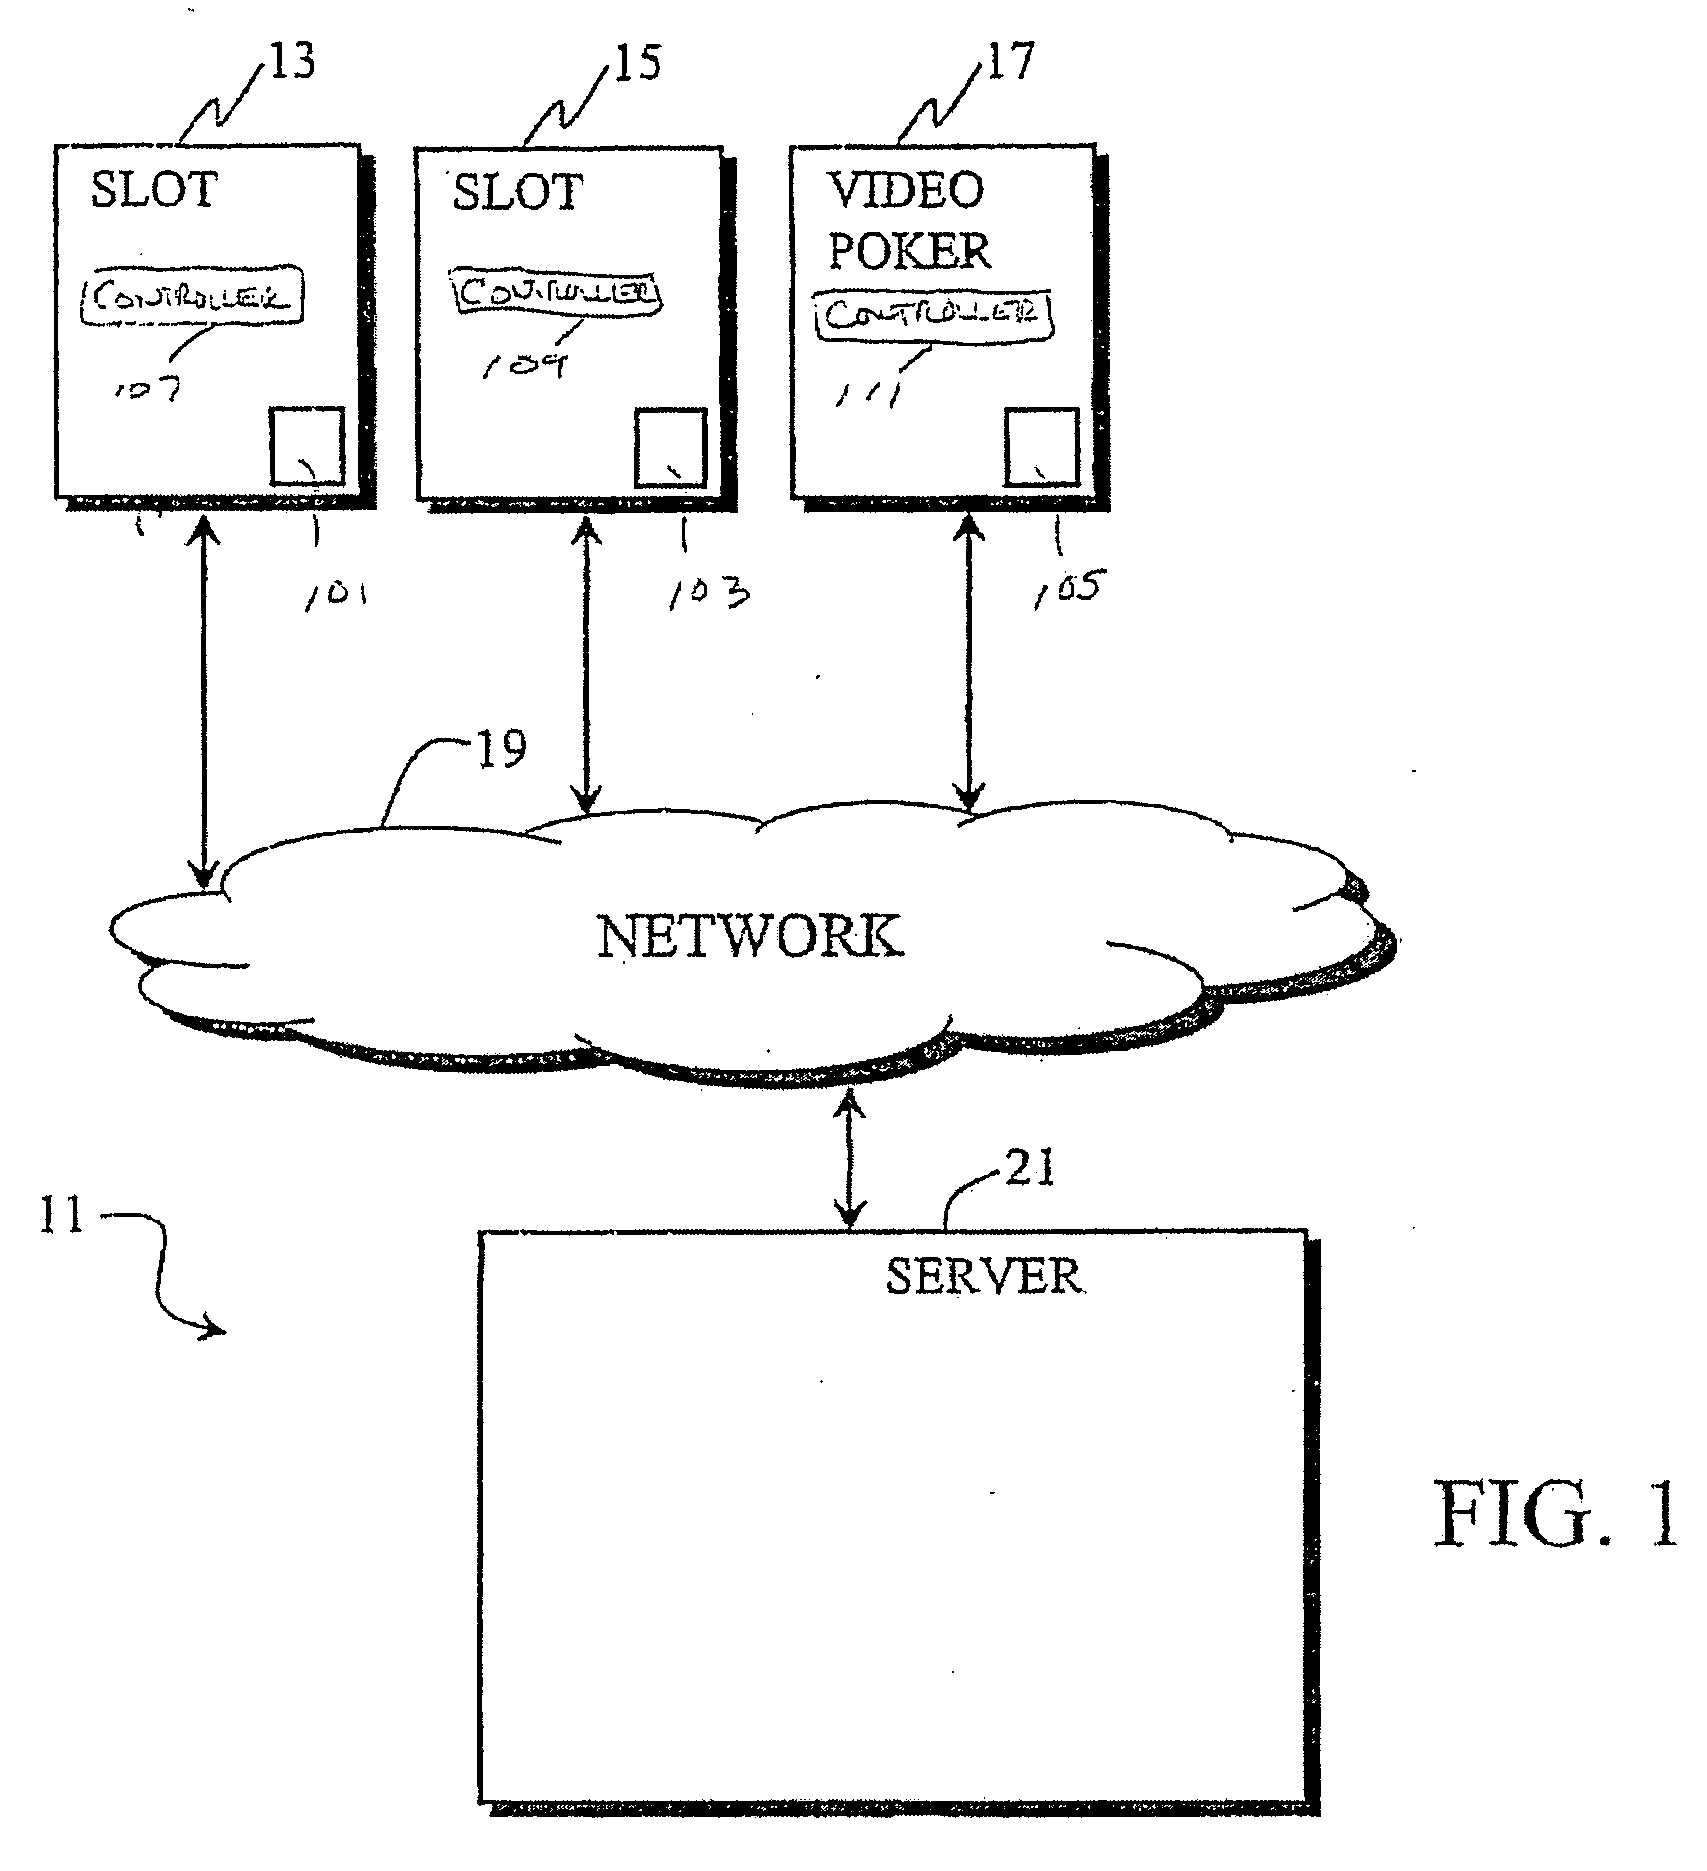 Communications interface for a gaming machine